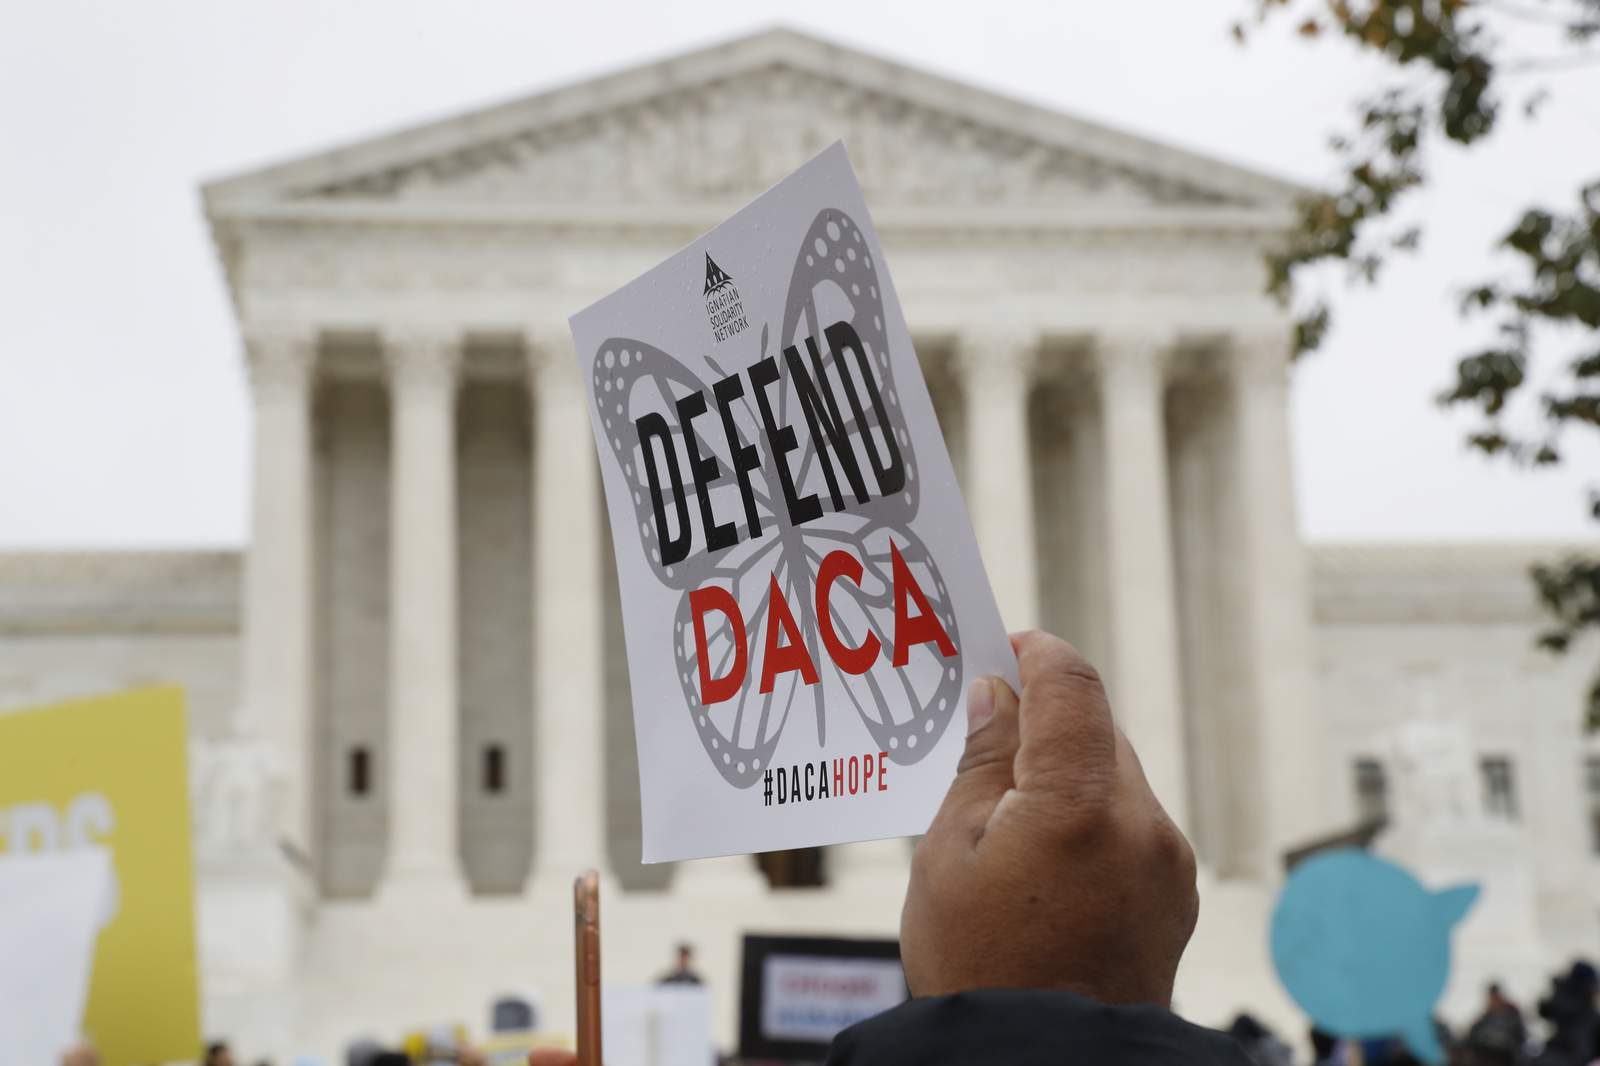 Nobody is above the law: Local civil rights organization files lawsuit against Trump for not allowing DACA applications